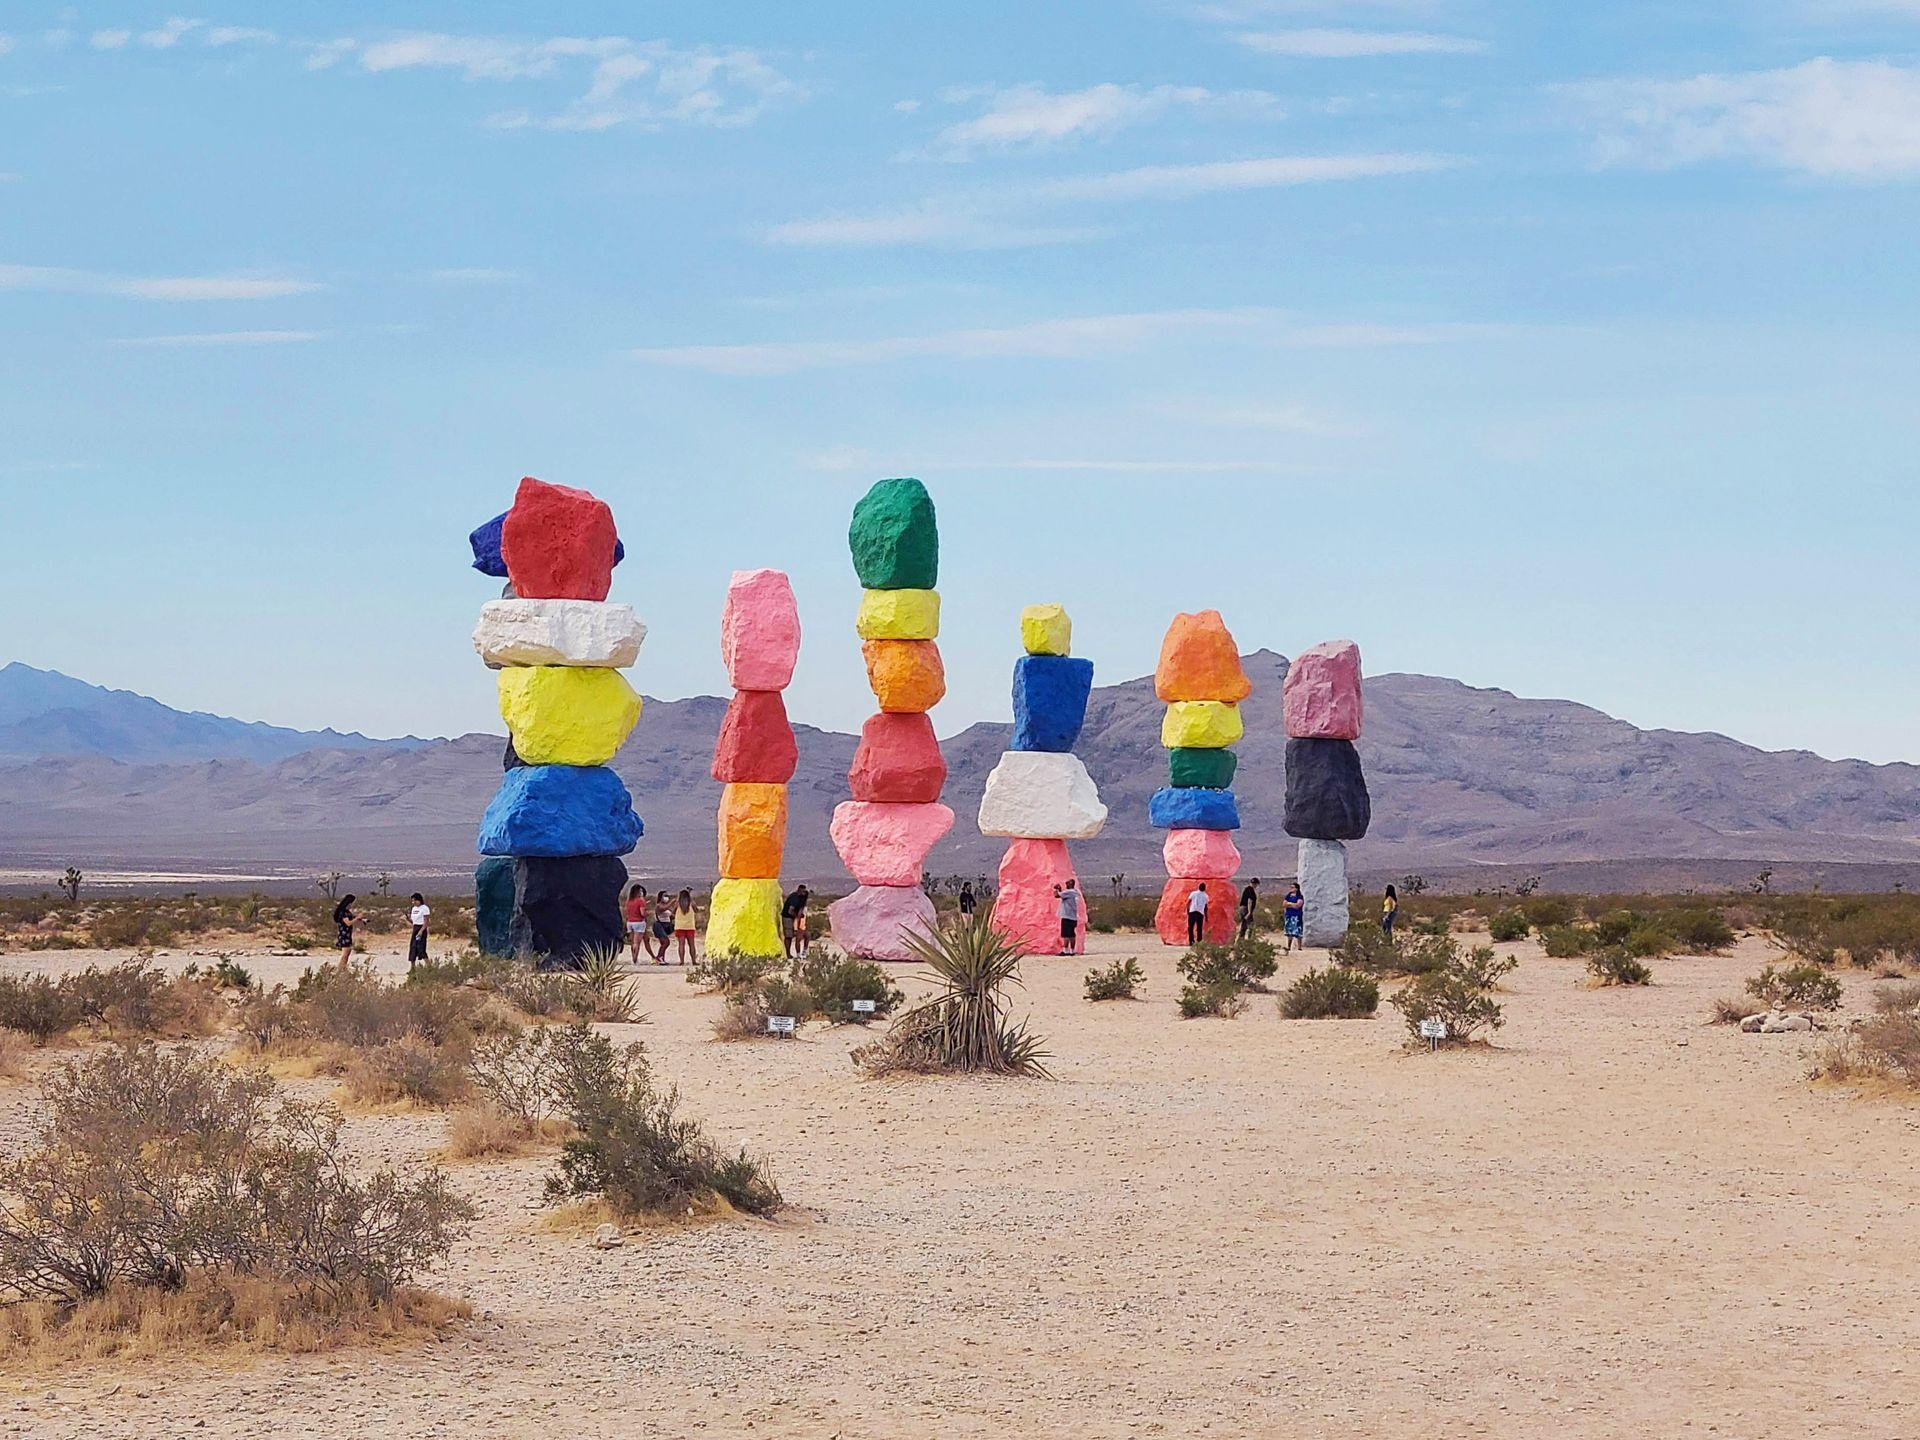 Seven towers of colorful rocks in the Nevada desert.